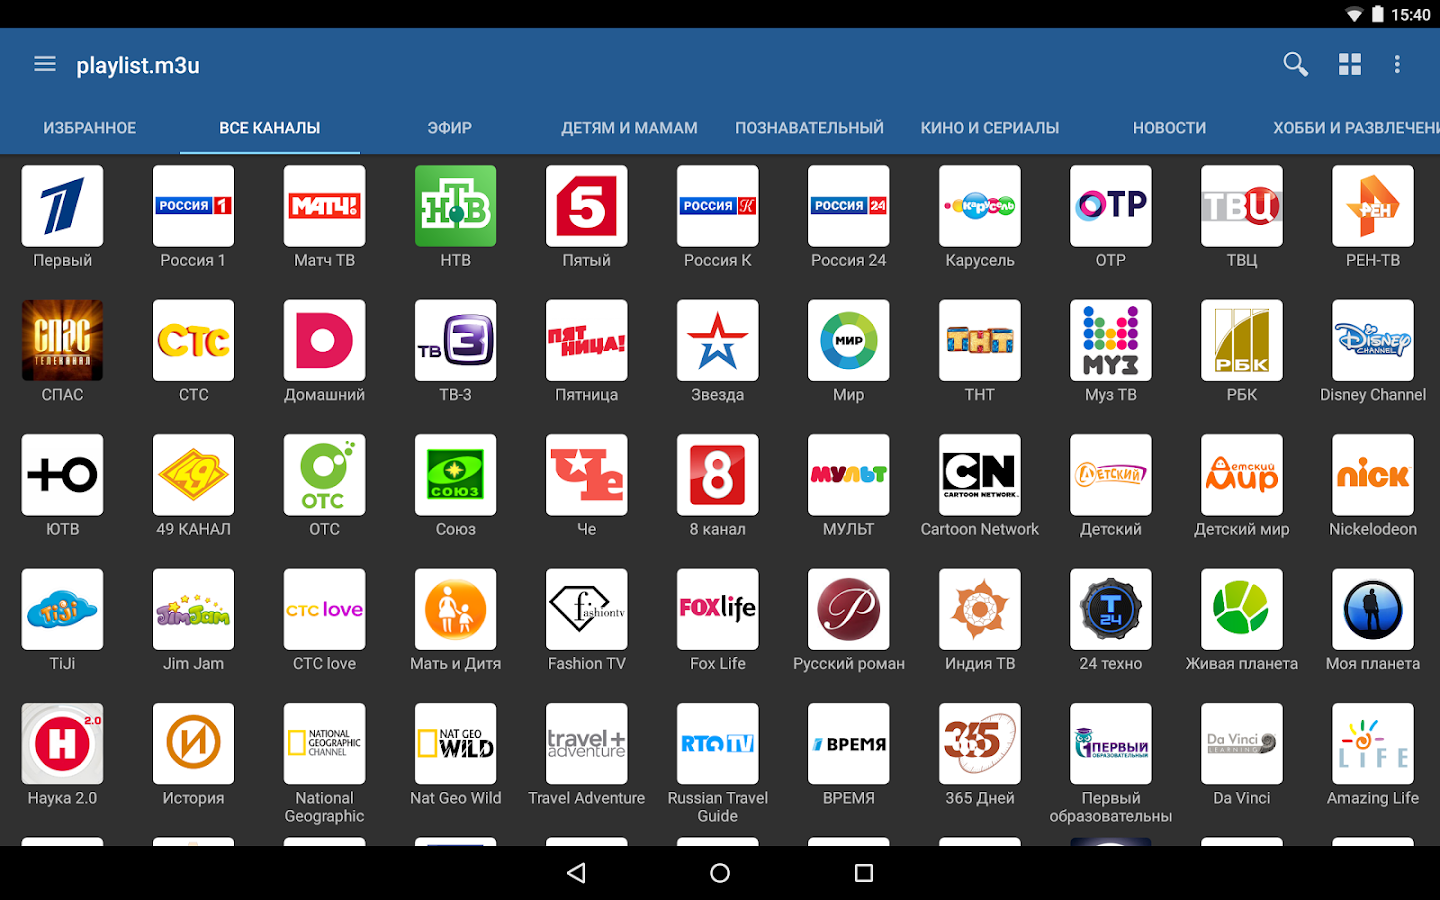 Watch +8000 IPTV Channels on your favorite Video Player